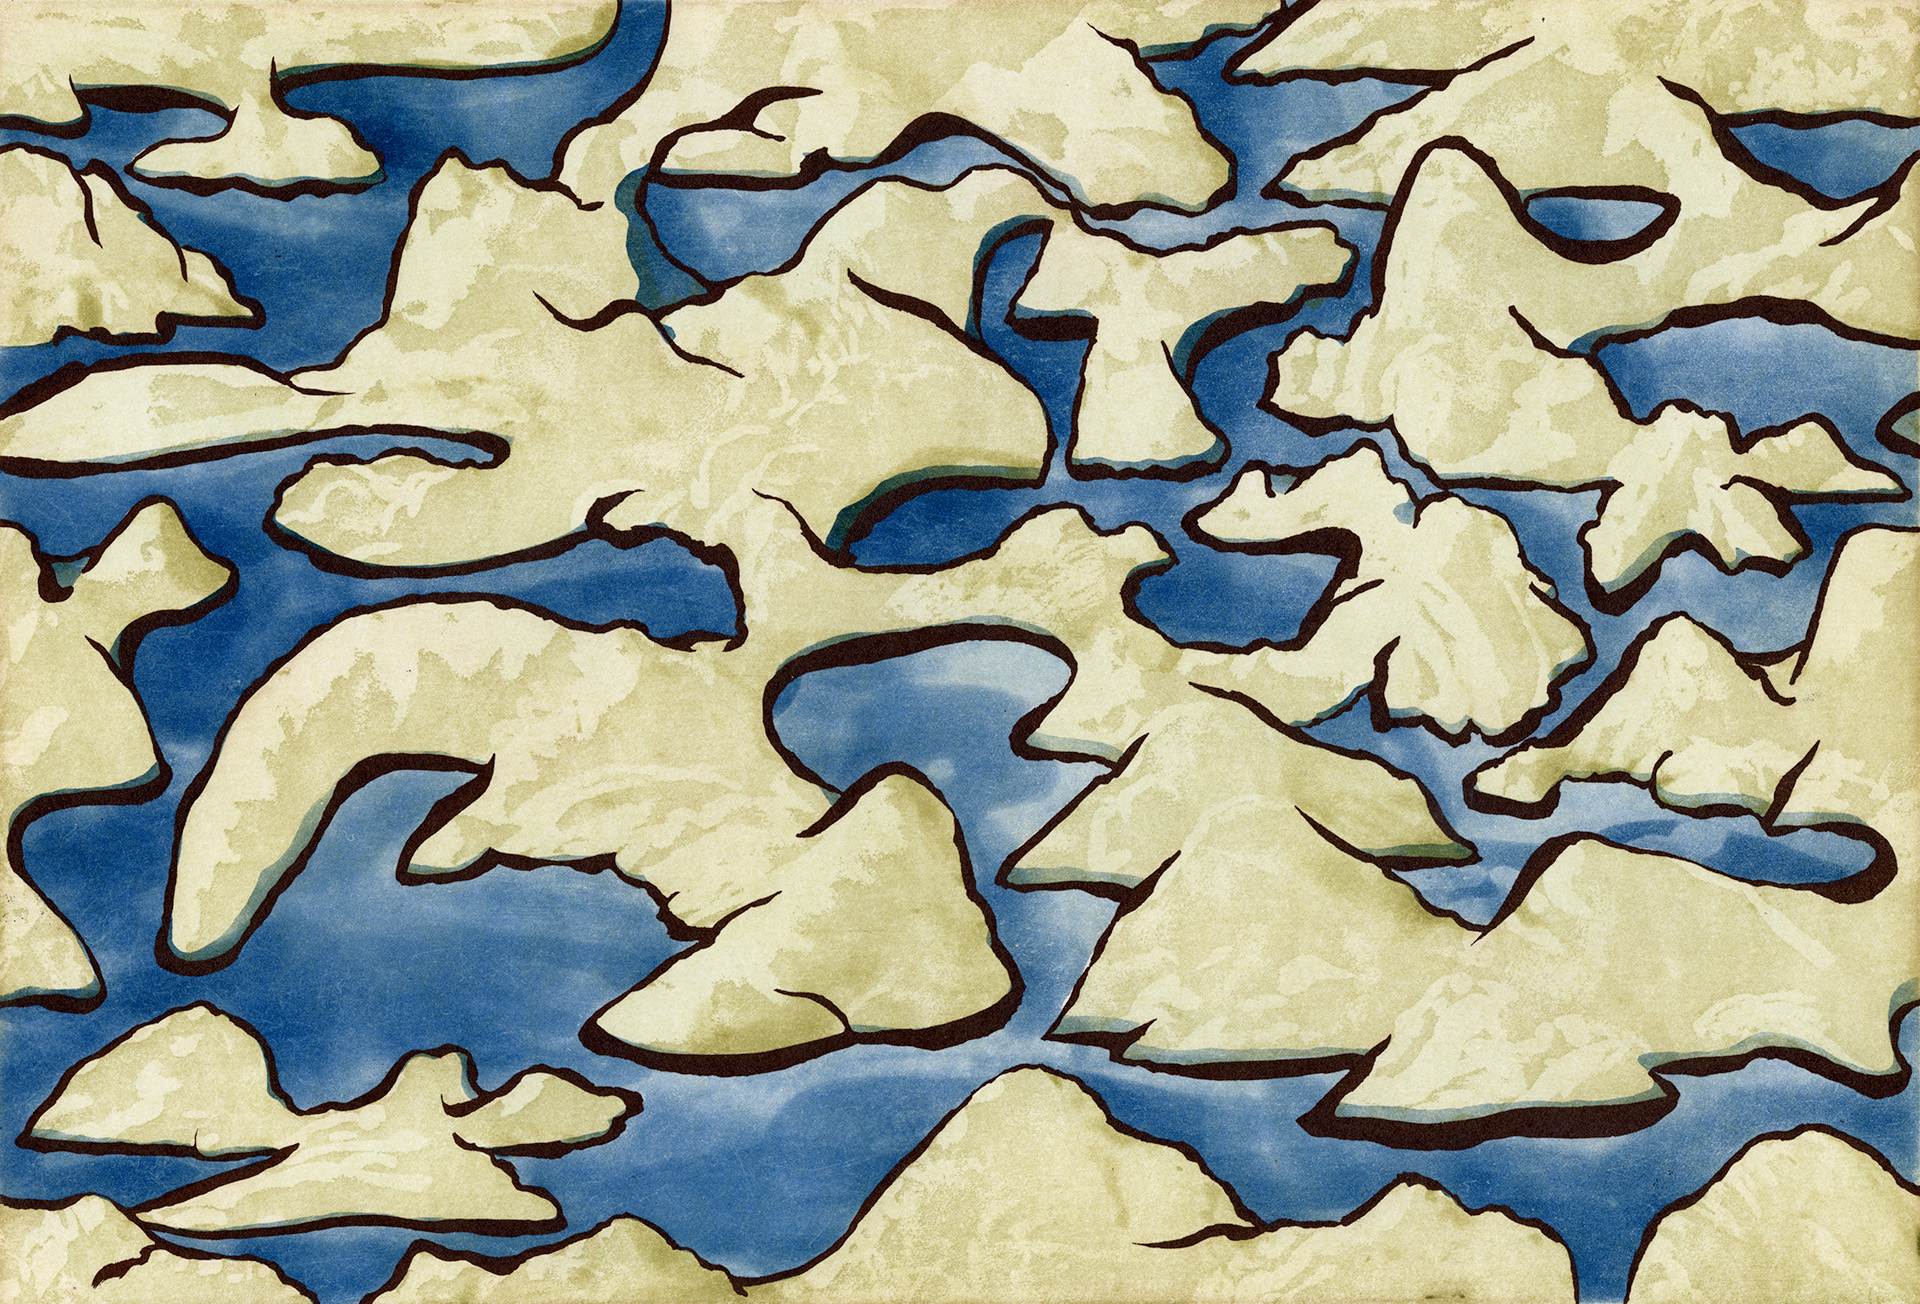 An aquatint etching in blues and cream evokes melting icecaps.